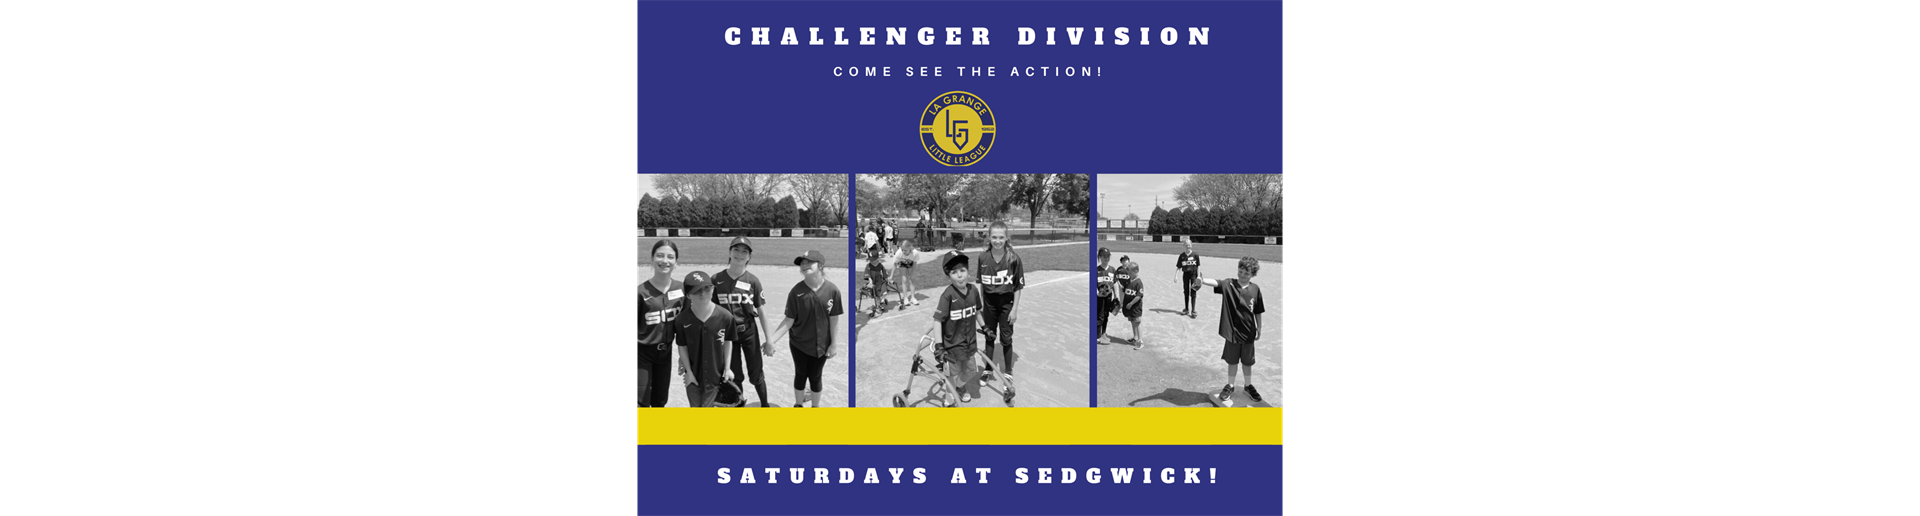 Challengers Every Saturday At Sedgwick!